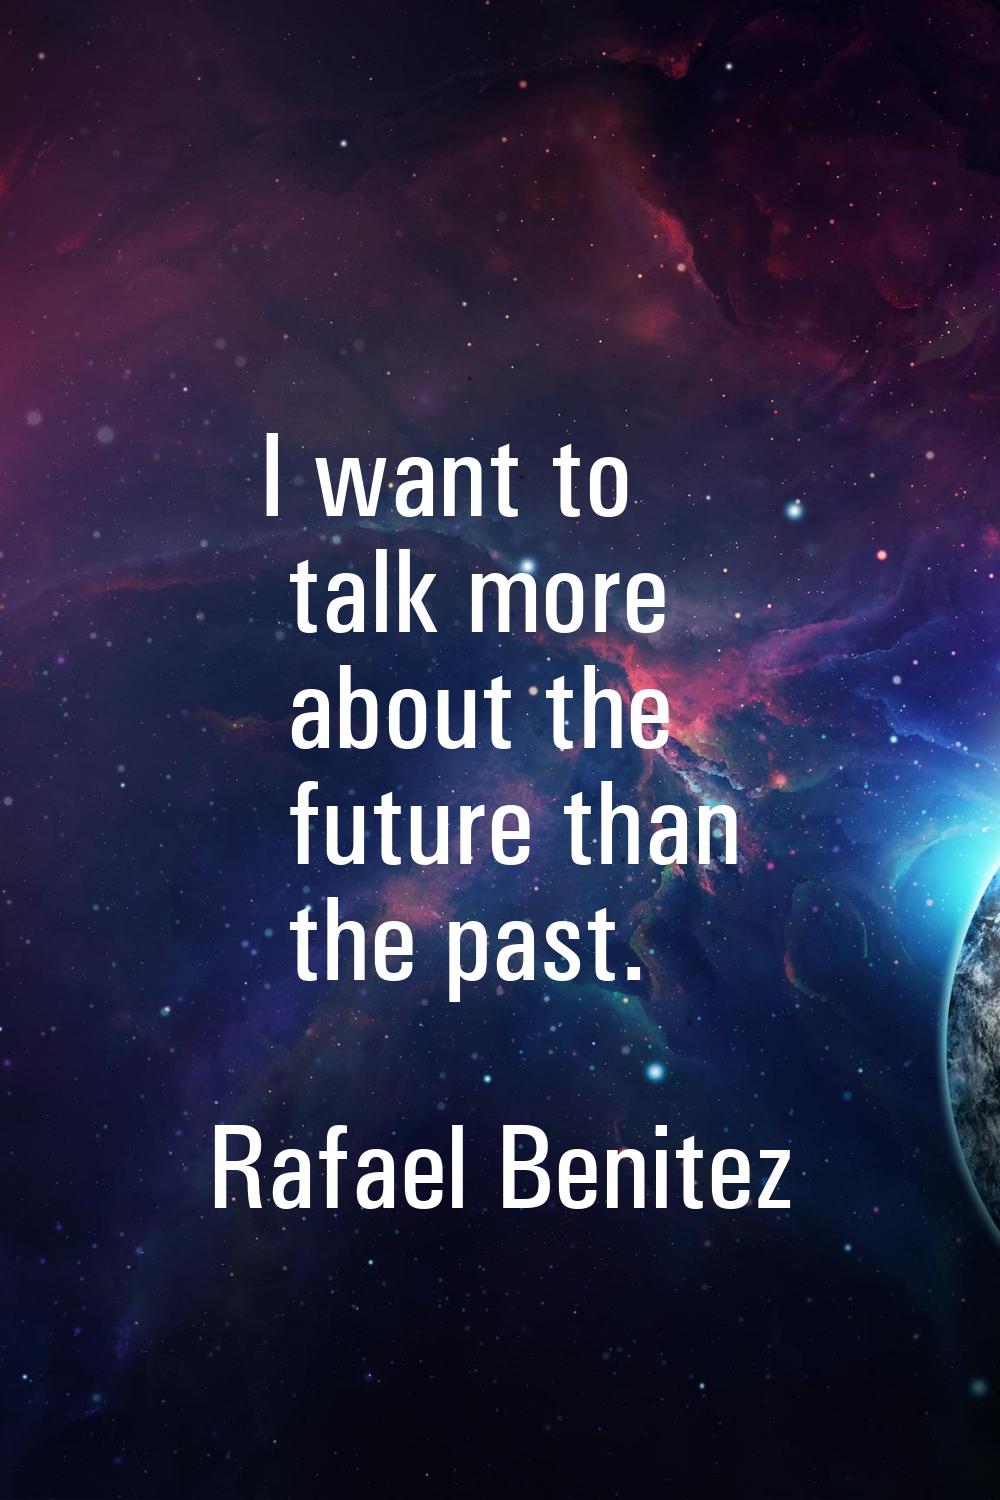 I want to talk more about the future than the past.